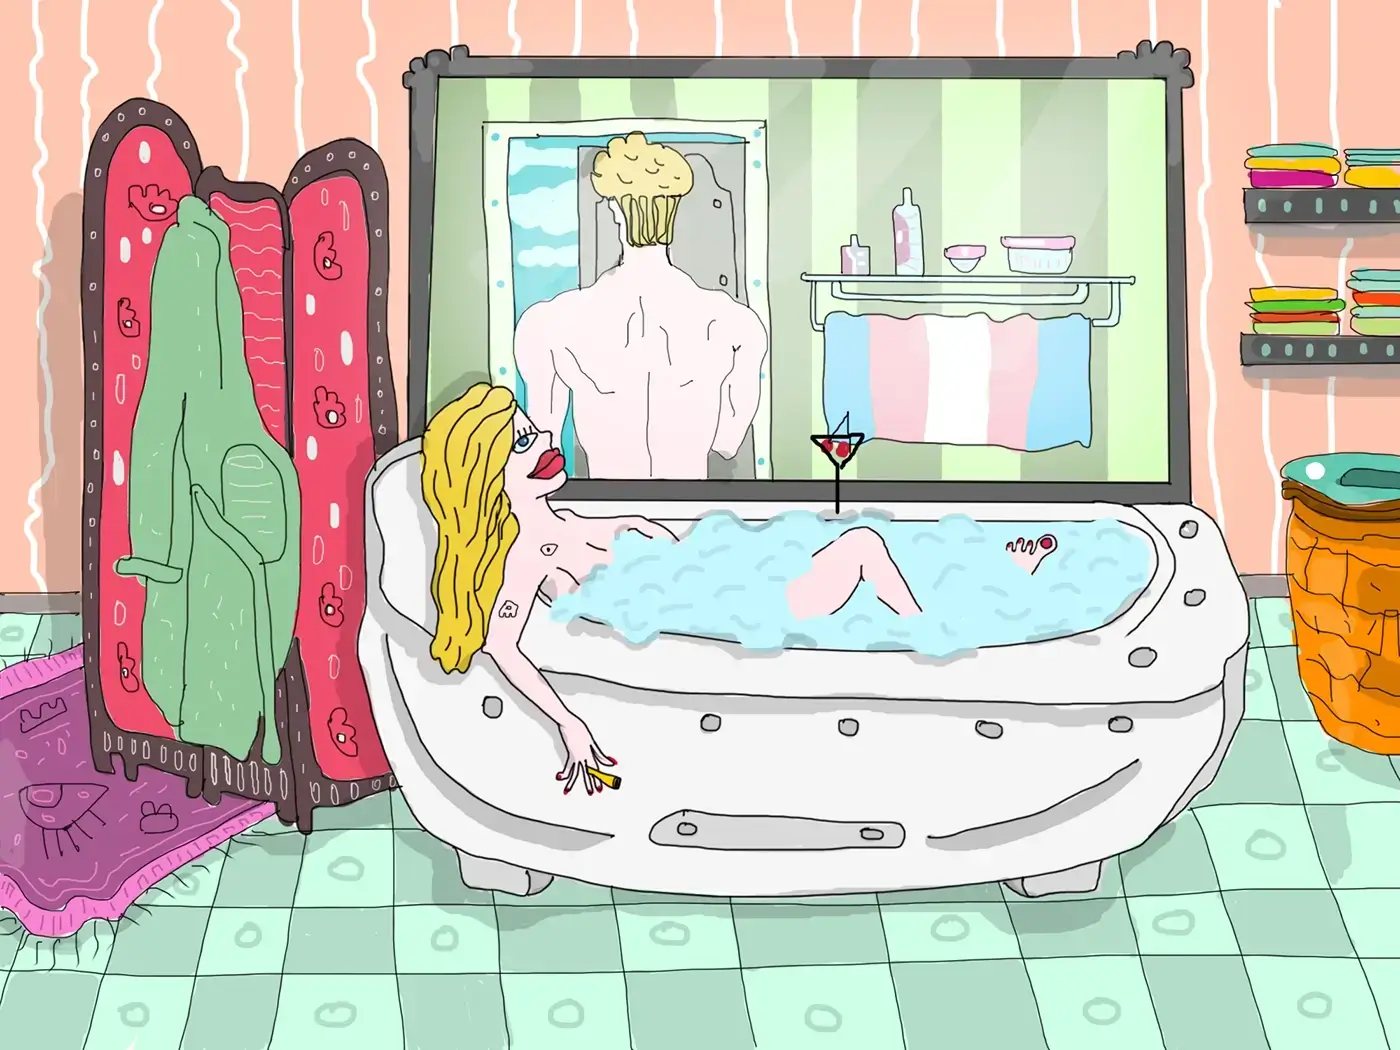 Illustration: A touching portrayal of a woman who, after transitioning from being a man, now finds happiness and fulfillment in her life as a woman. In the bathtub, she revels in her true self, while in the distance, her past self as a man watches contentedly. Created by Milena Stanisavljevic. Explore more at miletart.com.